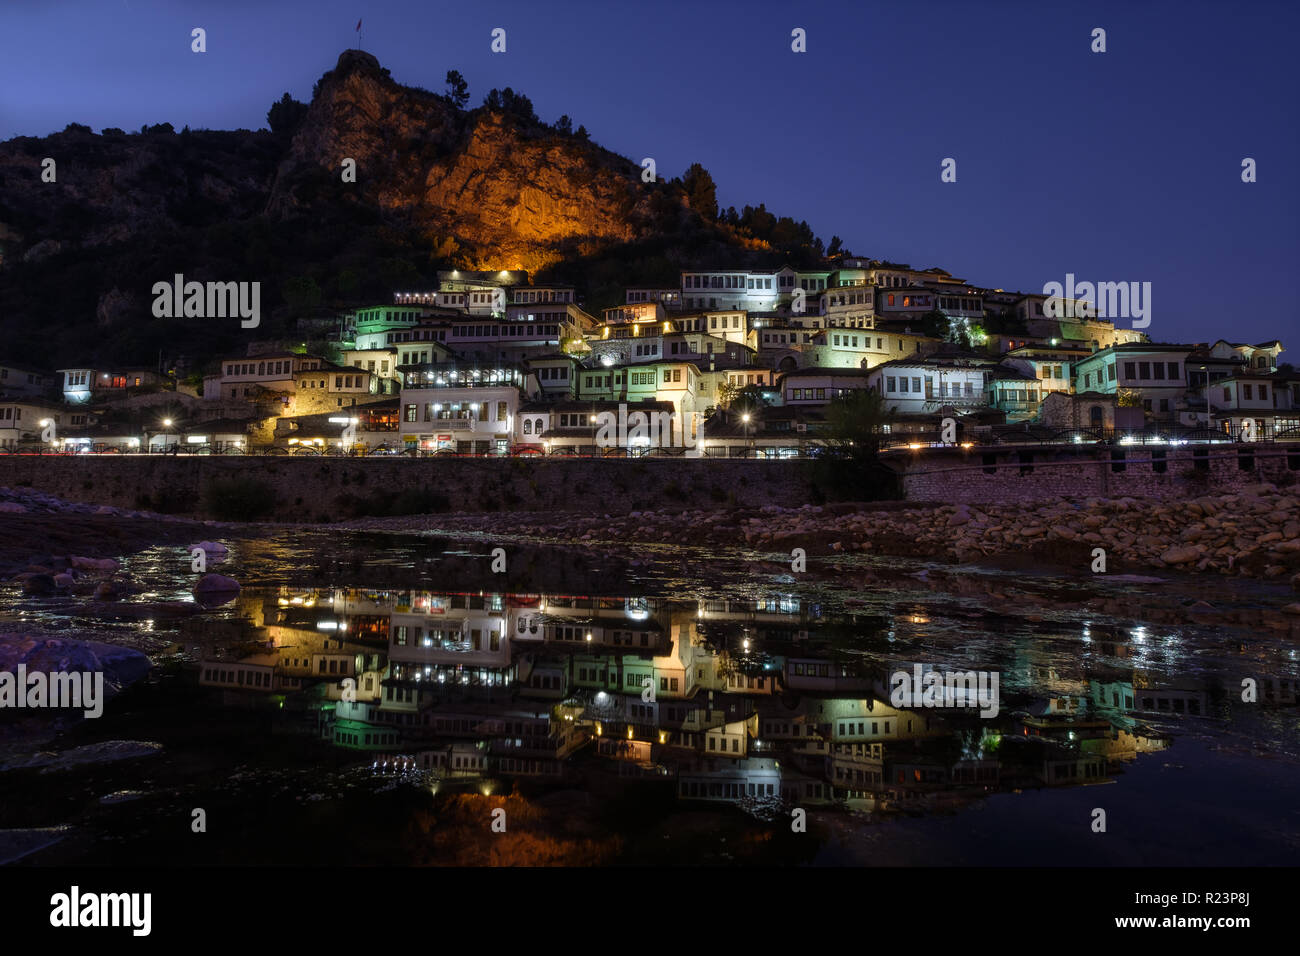 Night view of the houses of Berat, Albania known as the one thousand window city. Reflection of lights in river. Castle overviews the scene Stock Photo